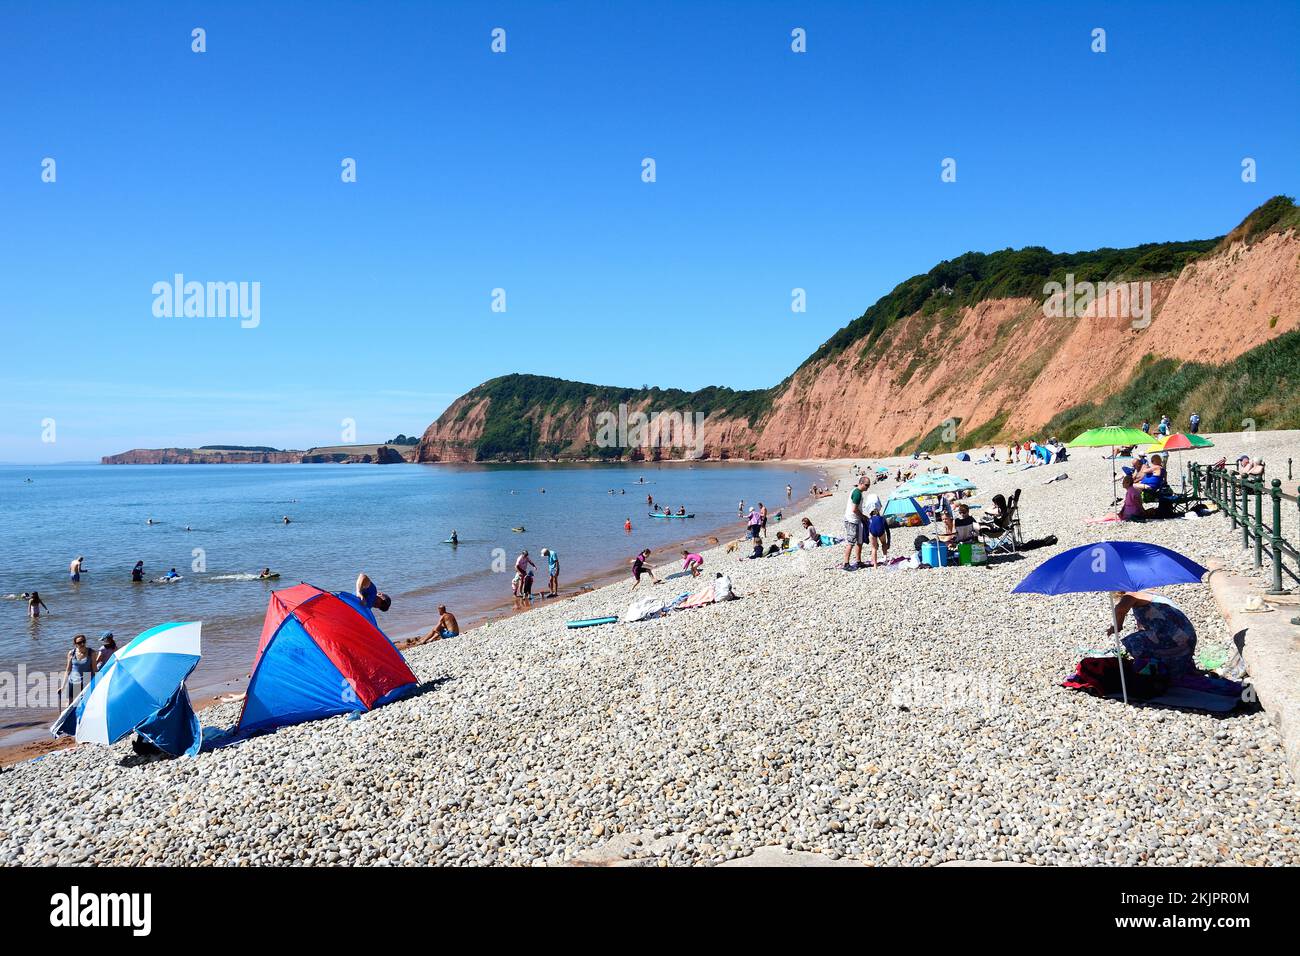 Tourists relaxing on Jacobs Ladder beach with views towards the cliffs, Sidmouth, Devon, UK, Europe. Stock Photo